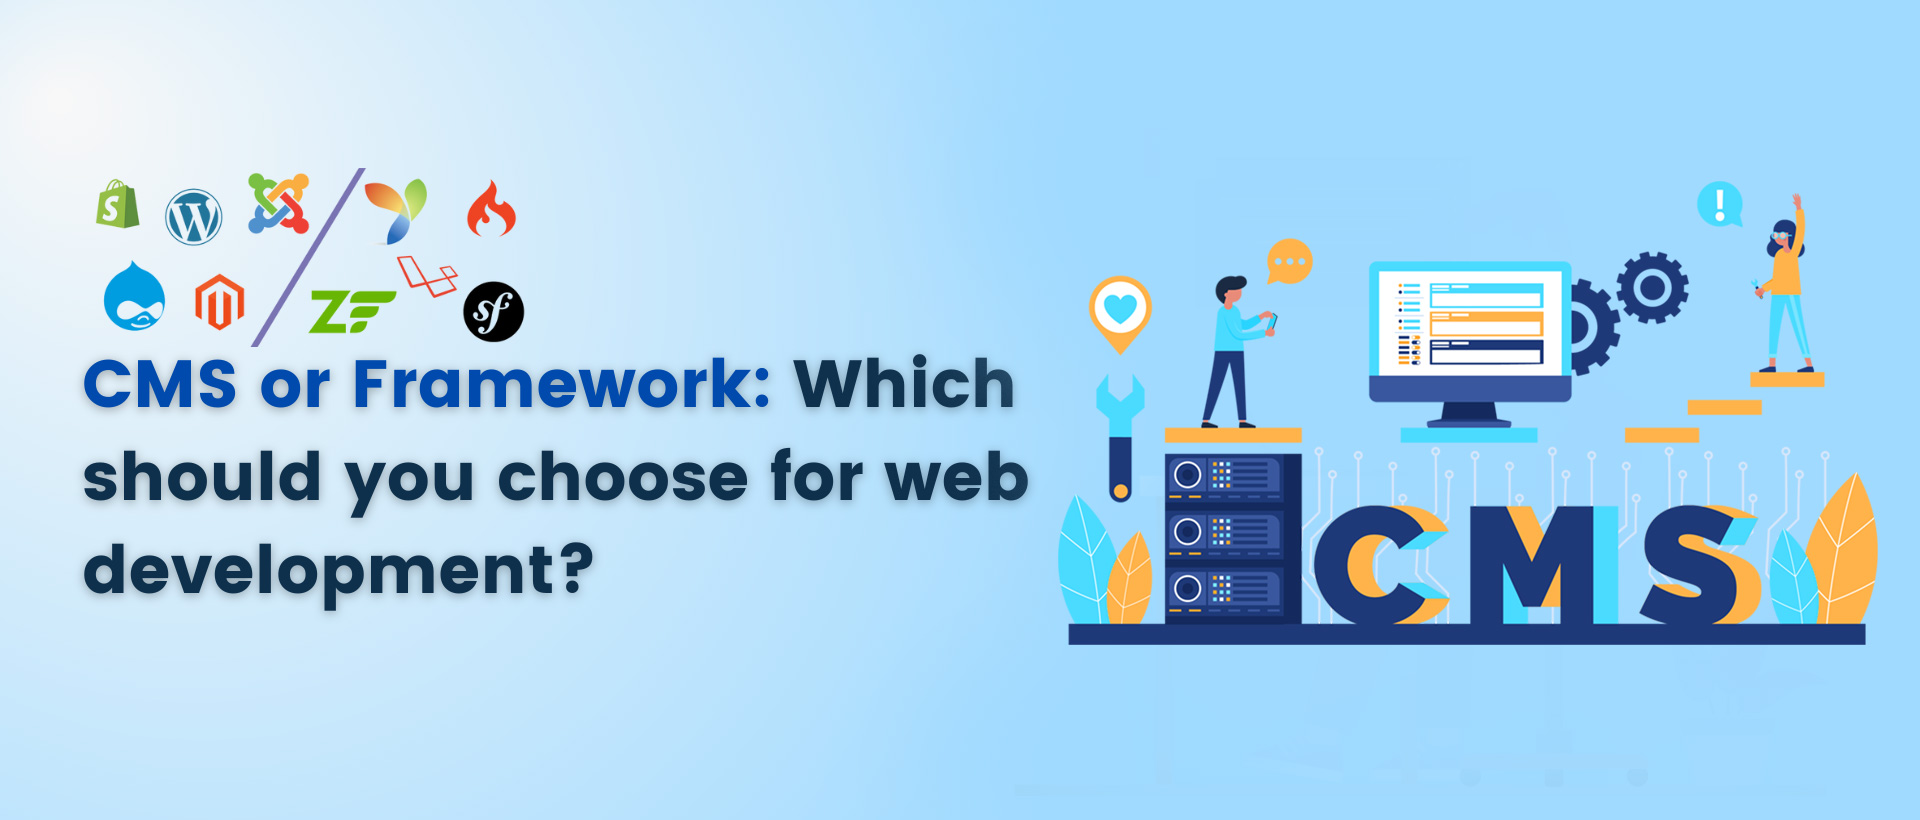 CMS or Framework : Which should you choose for web development?